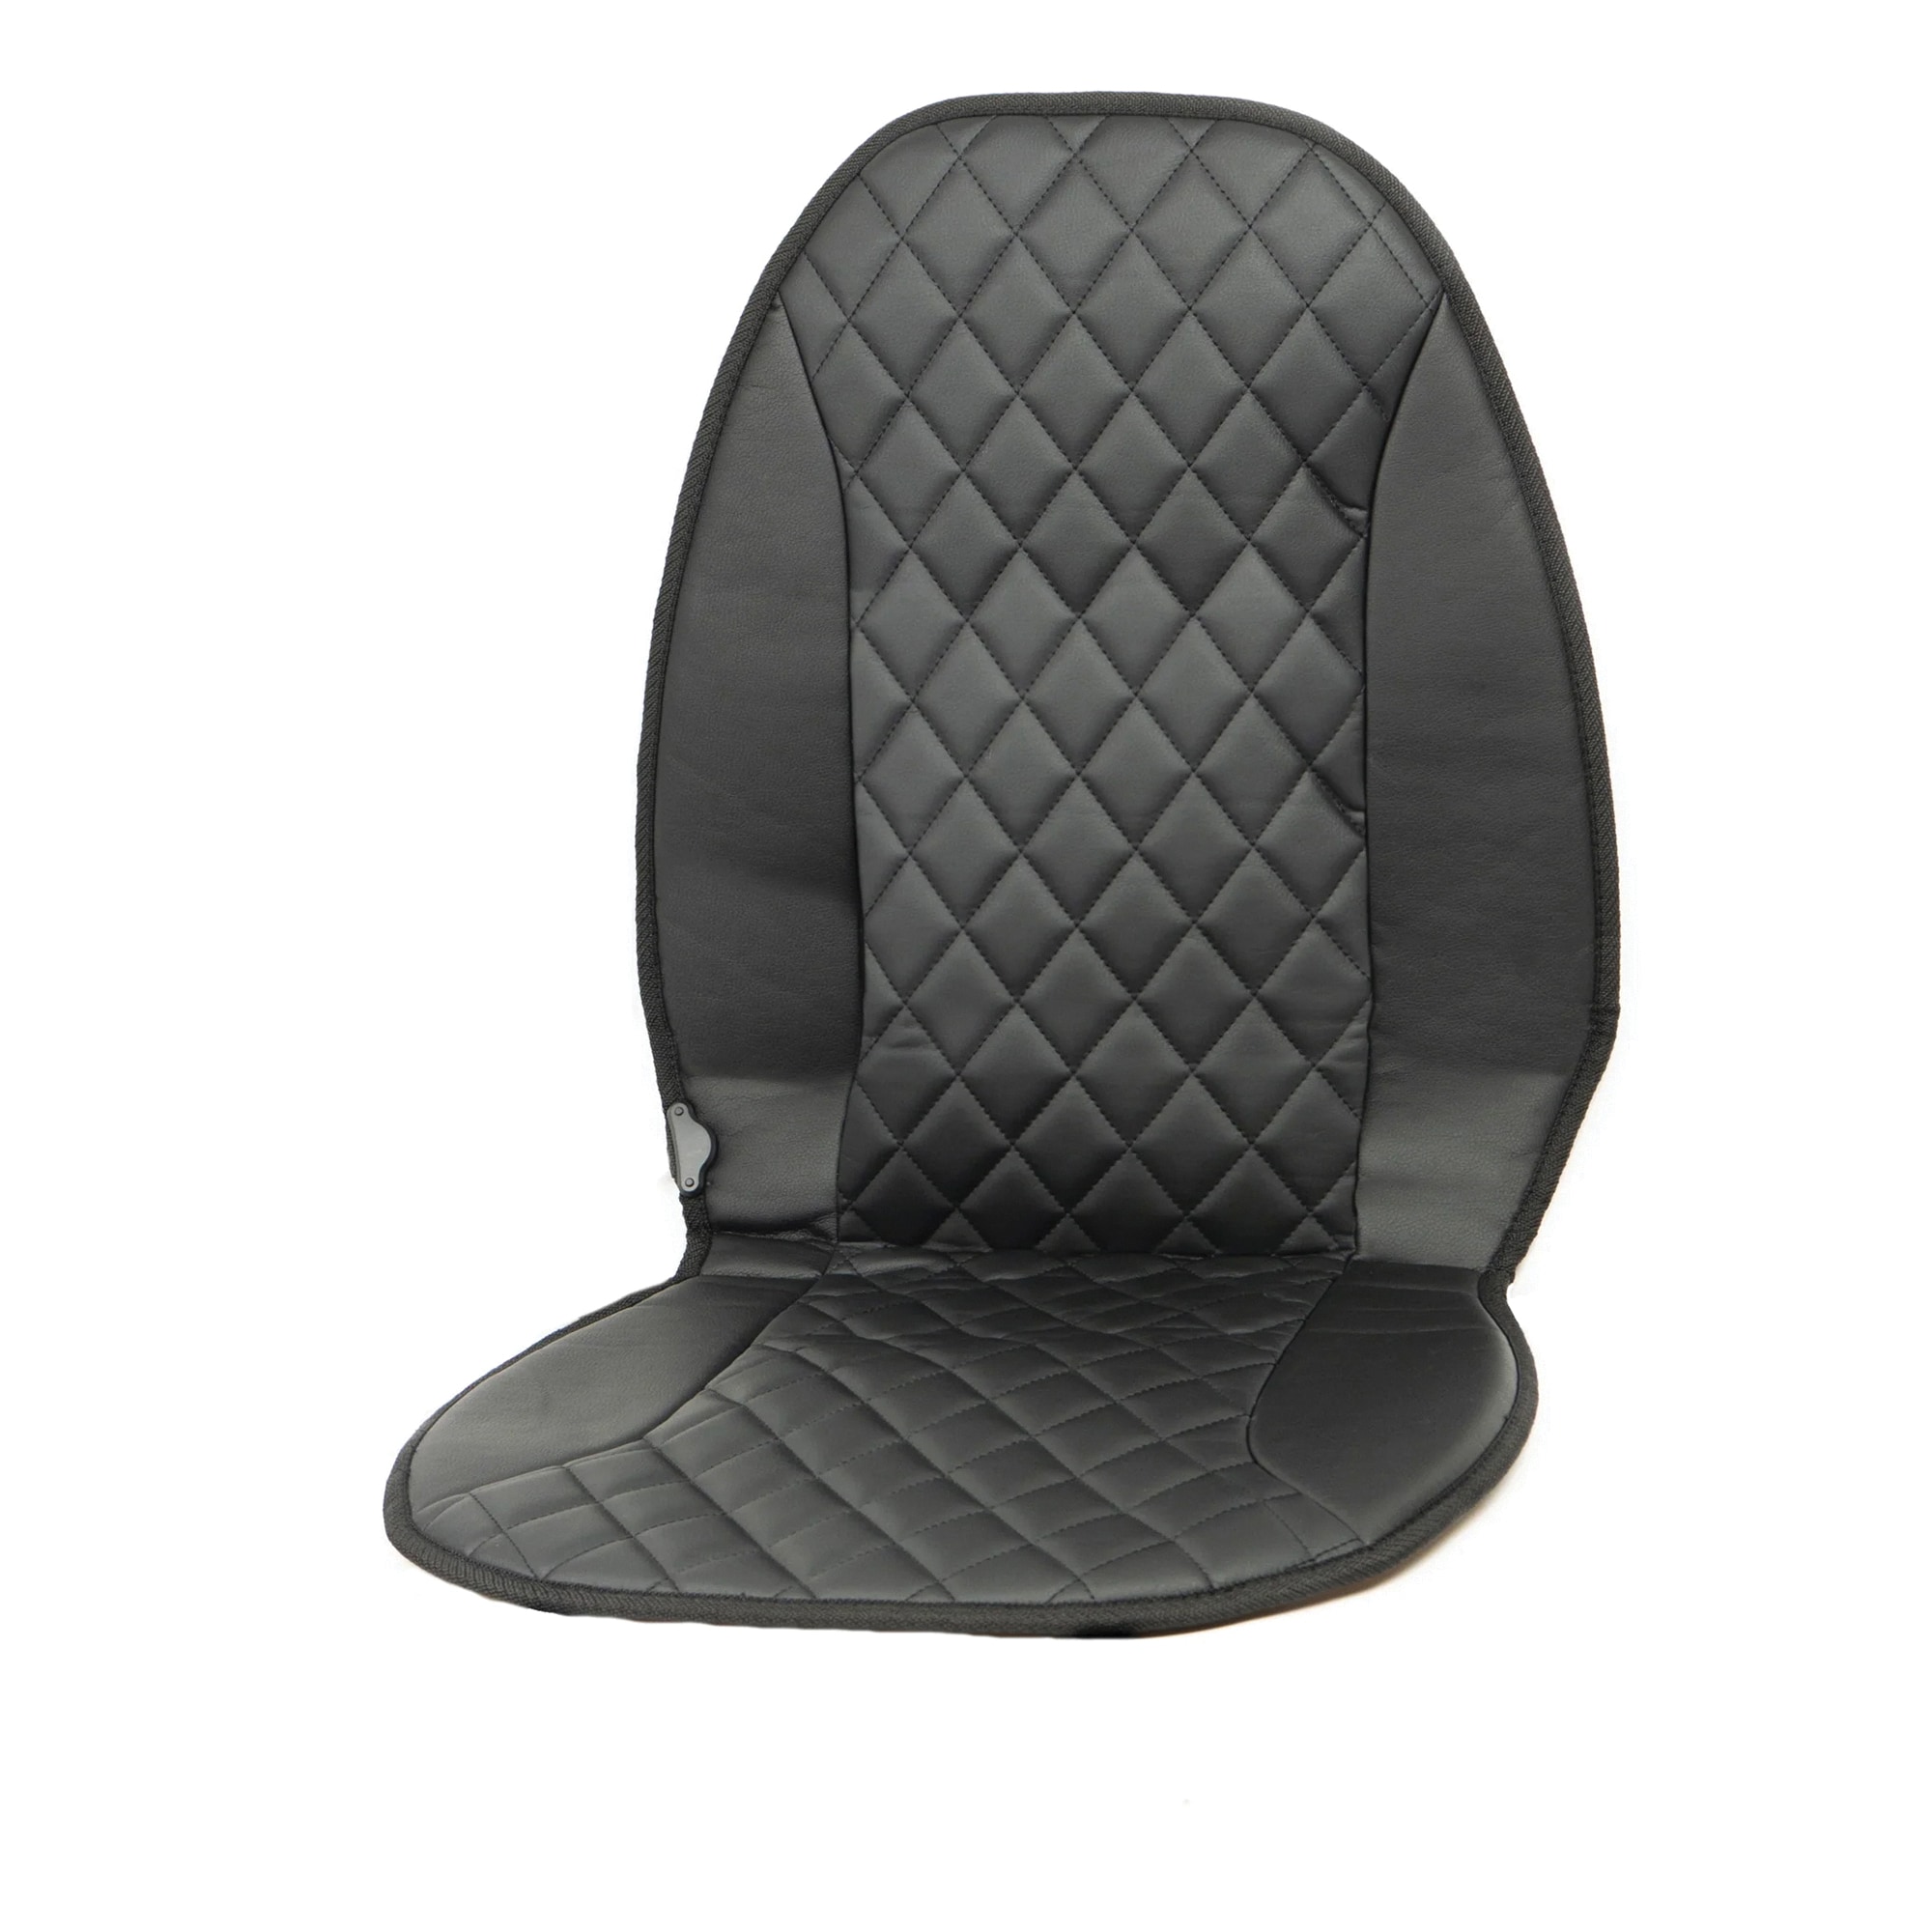 HealthMate Heated Car Seat Cushion - Black Polyester, 12-Volt, Even Heat  Distribution, Flexible Copper Nickel Alloy Wire, Enhanced Safety and  Comfort in the Interior Car Accessories department at